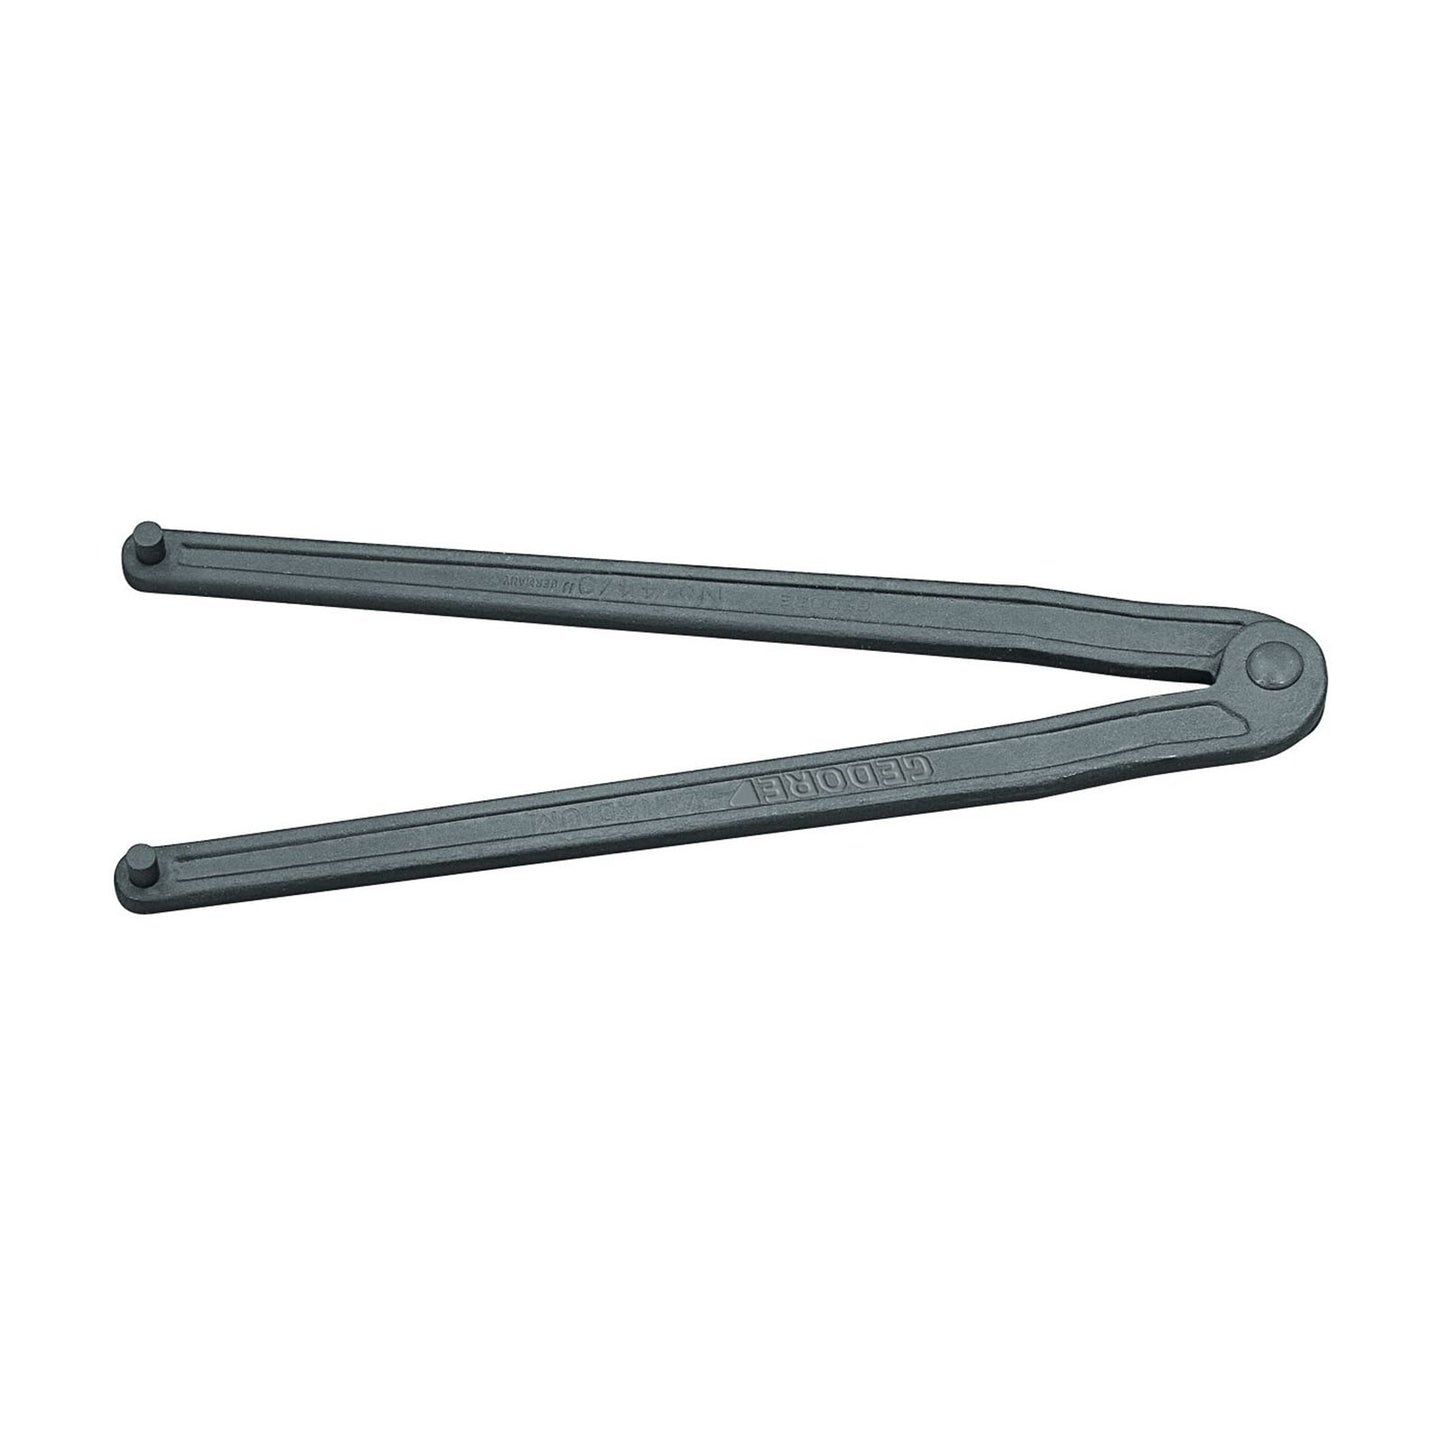 GEDORE 44 5 - Double Pivot Wrench, 5mm (6354640)